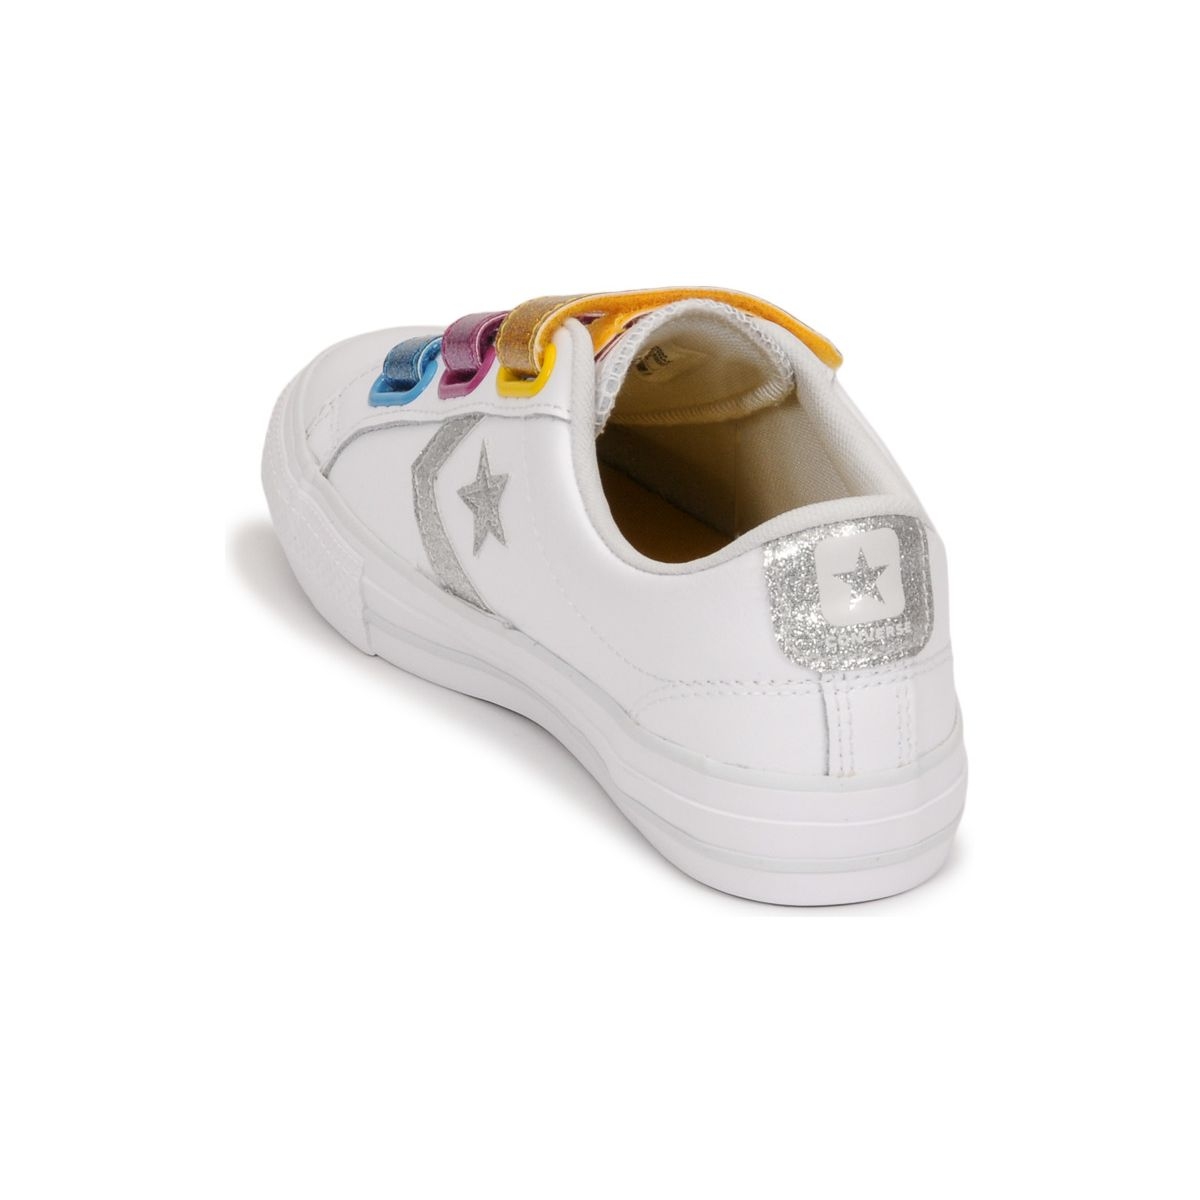 mode fille Converse star 3v blanc | VoShoes